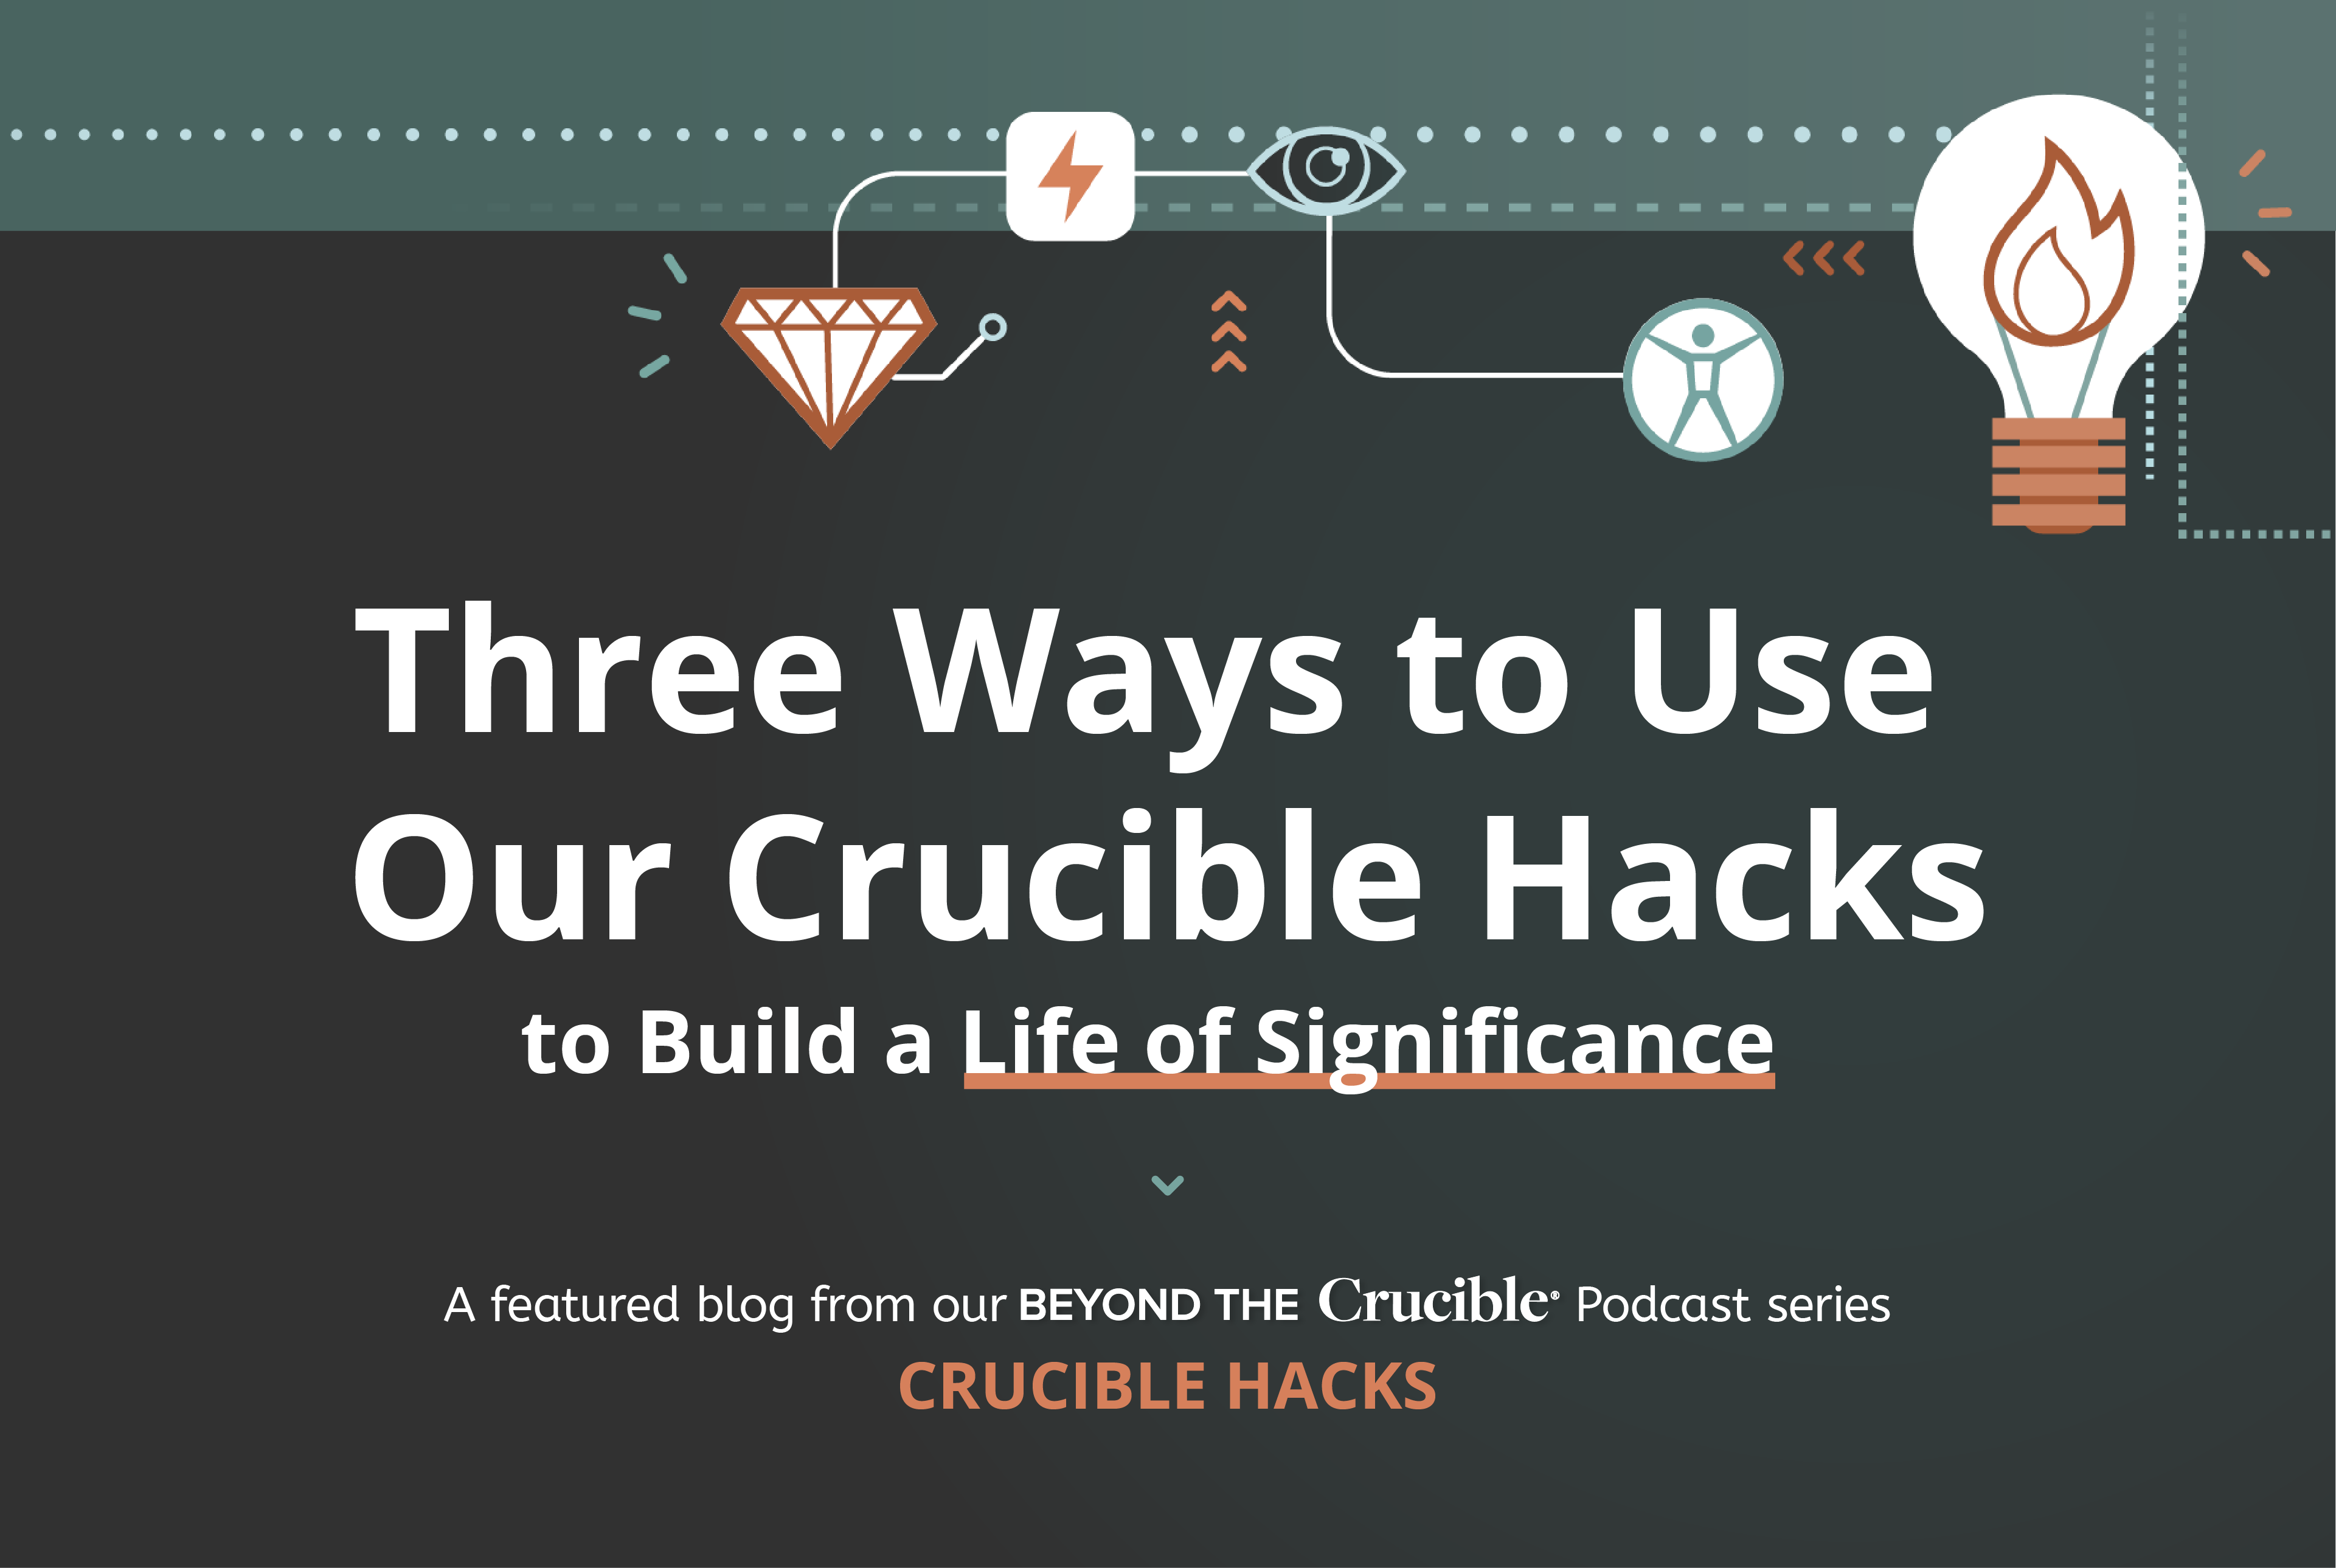 Three Ways to Use Our Crucible Hacks to Build a Life of Significance